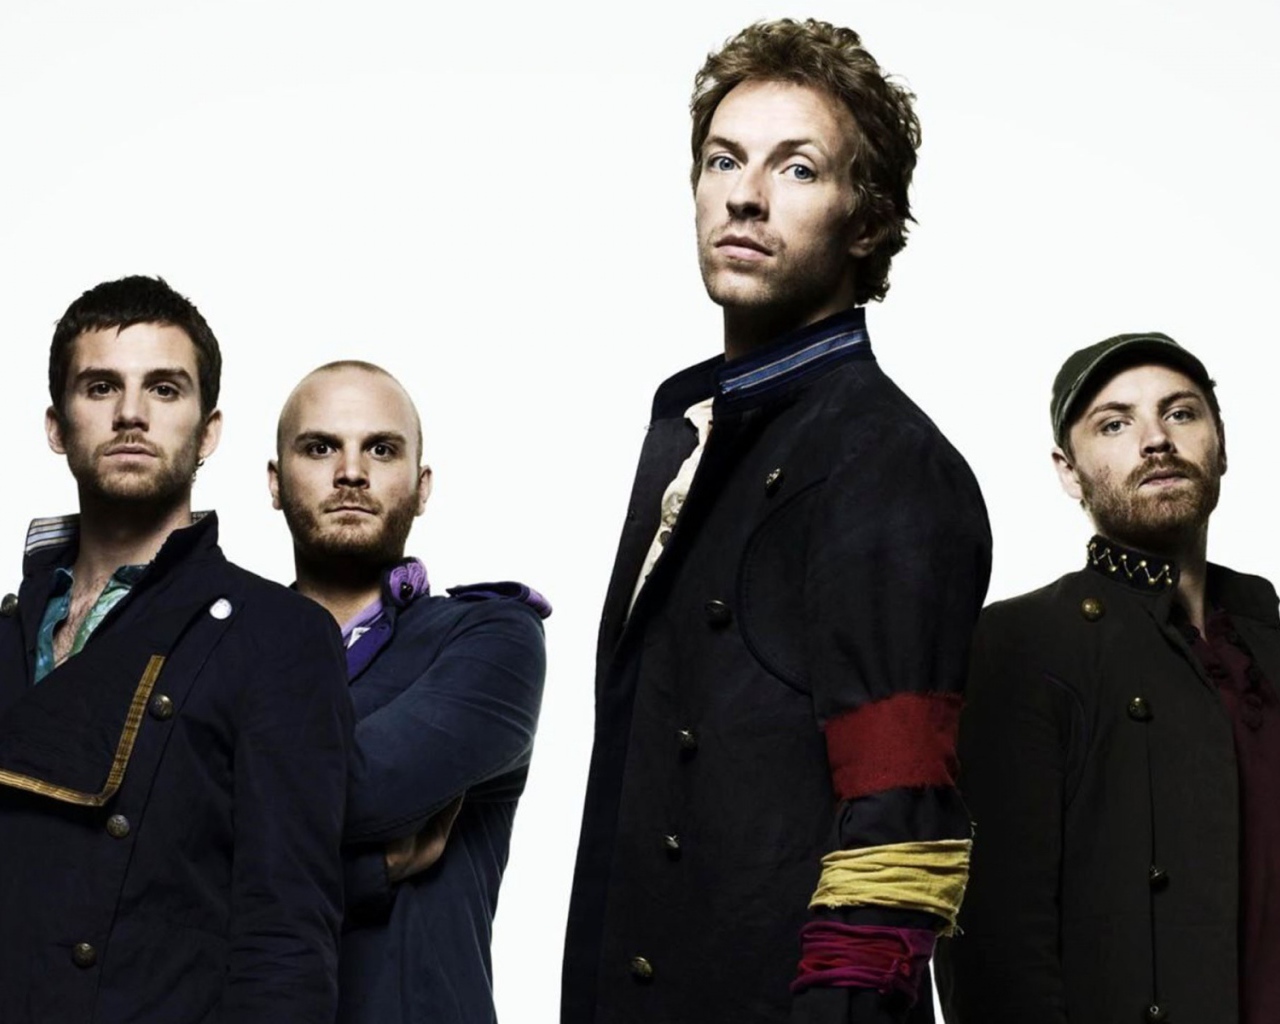 Coldplay in the white background